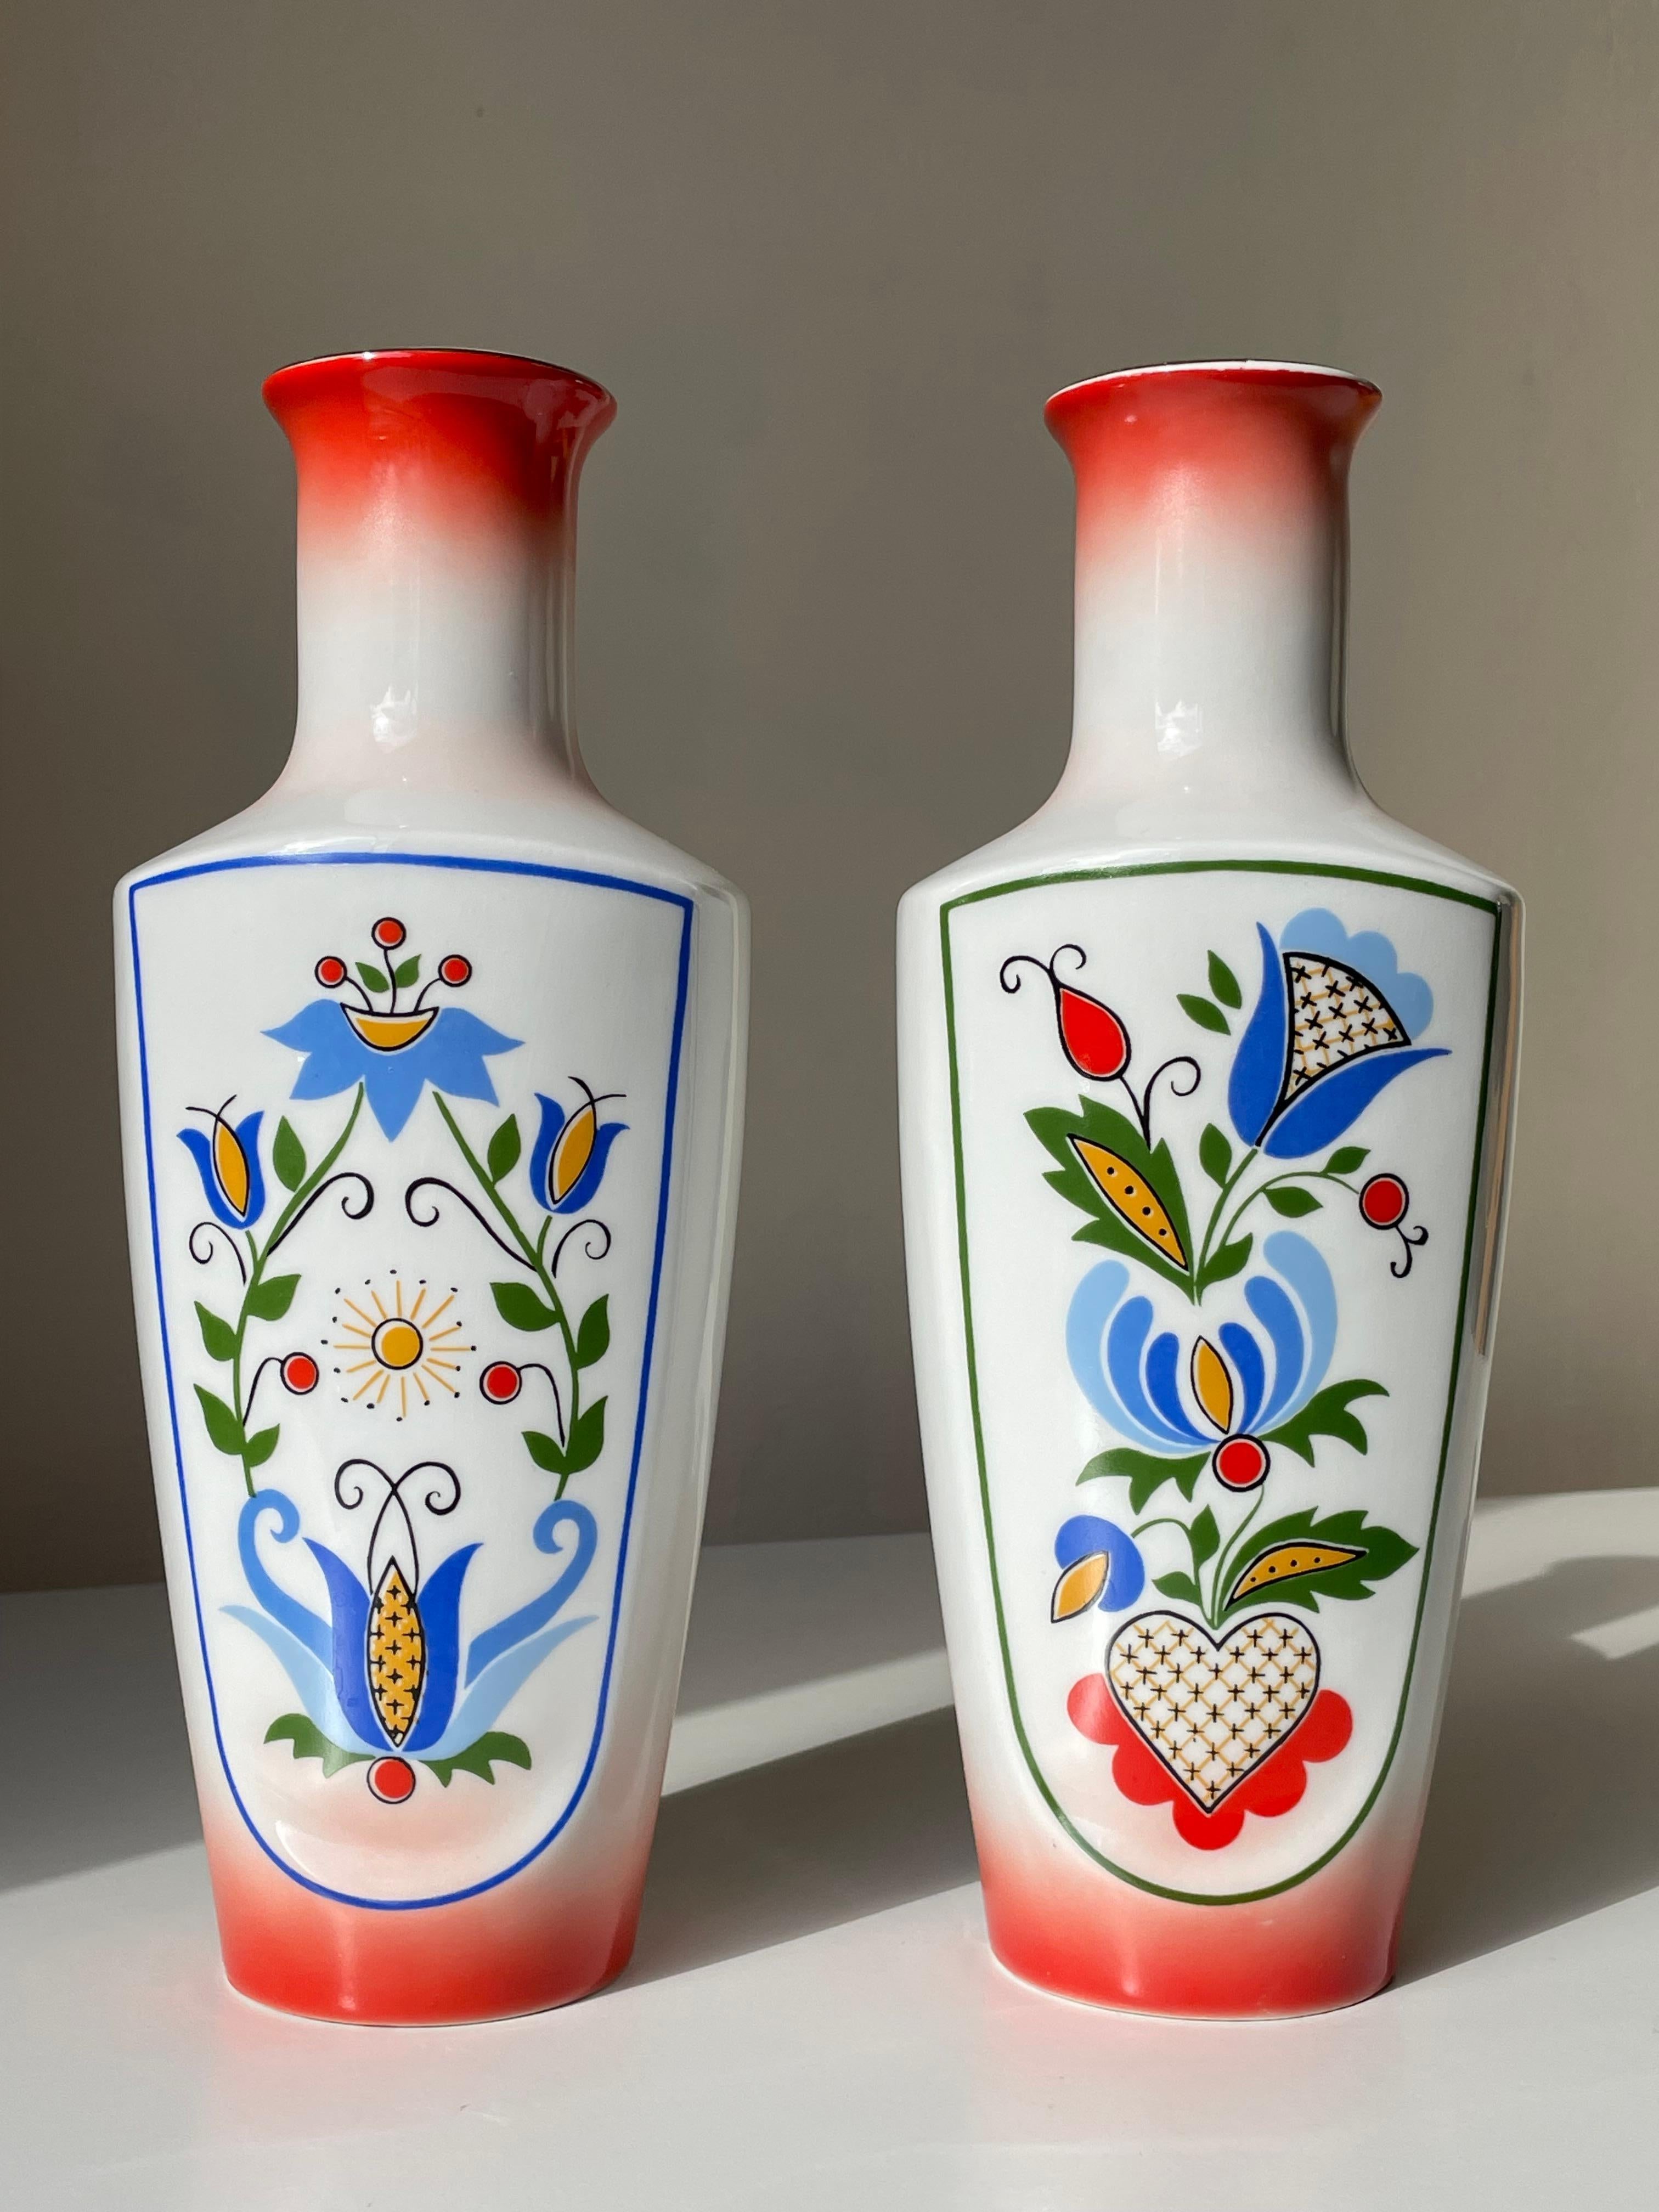 Set of two colorful bohemian 1970s porcelain vases decorated by hand in bright colors. Stylized floral folk art decorations in green, red, yellow and blue colors on white background with bright red base and top with golden lines. Manufactured by